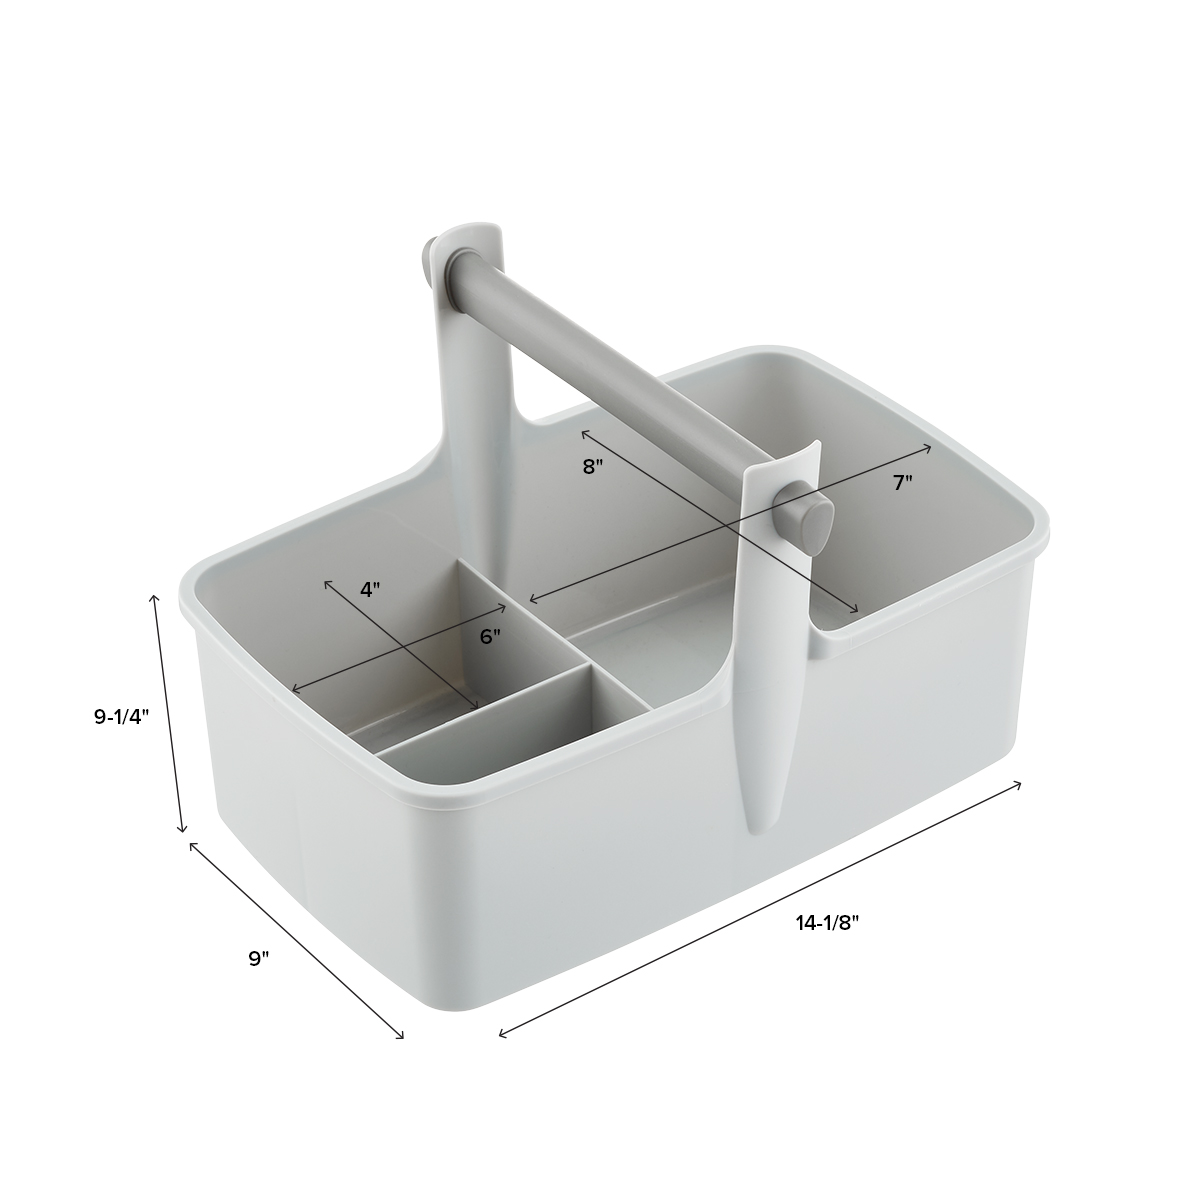 https://www.containerstore.com/catalogimages/449238/10075691-utility-bucket-grey-v2-DIM.jpg